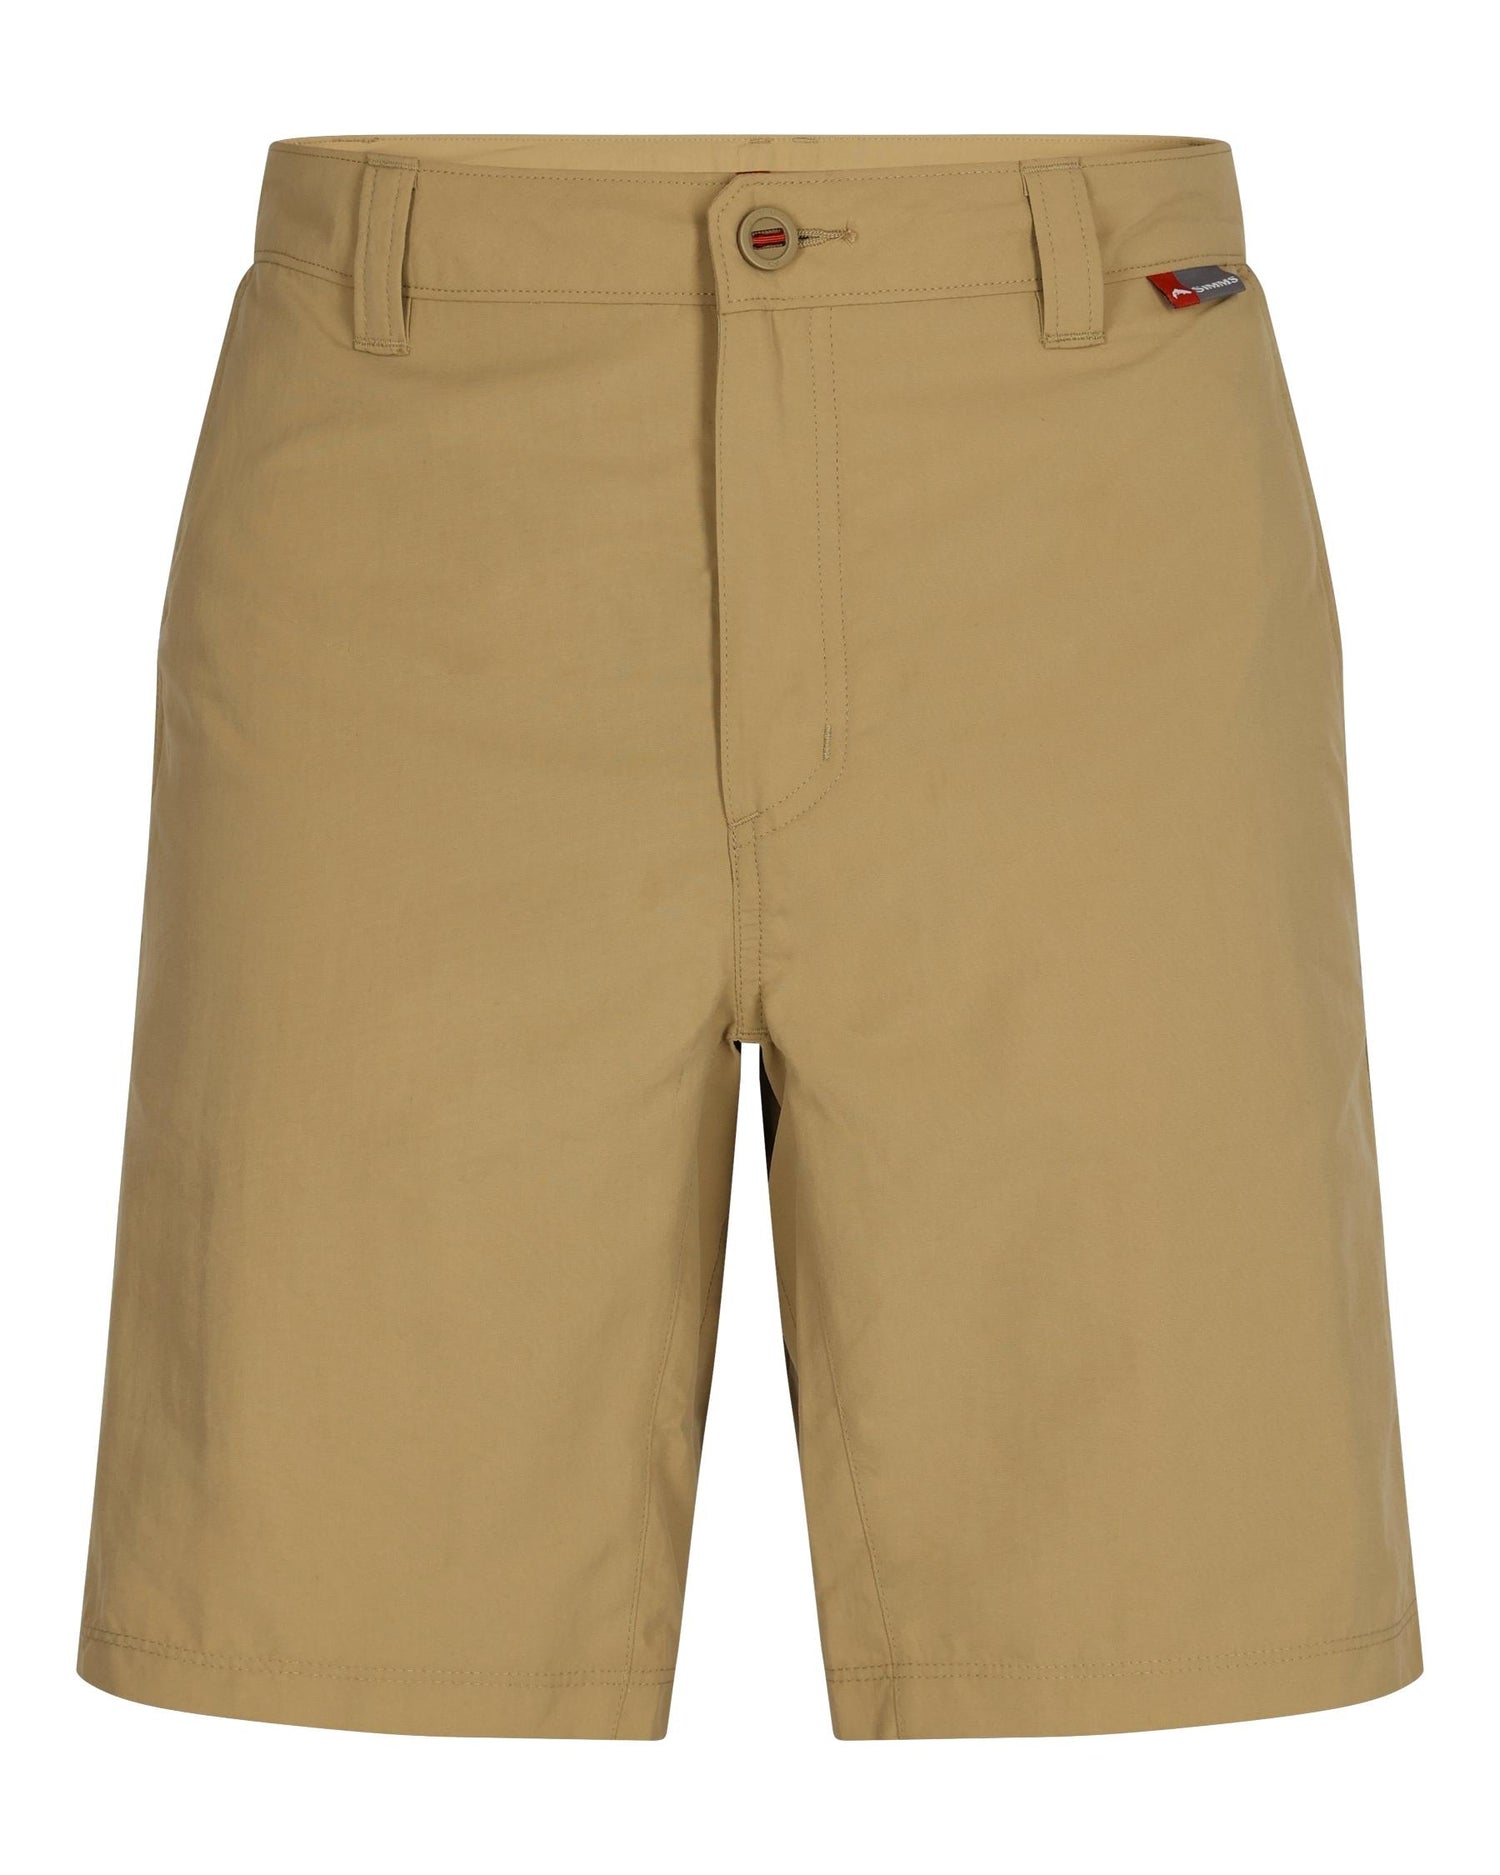 Simms Superlight Shorts Review - Wired2Fish